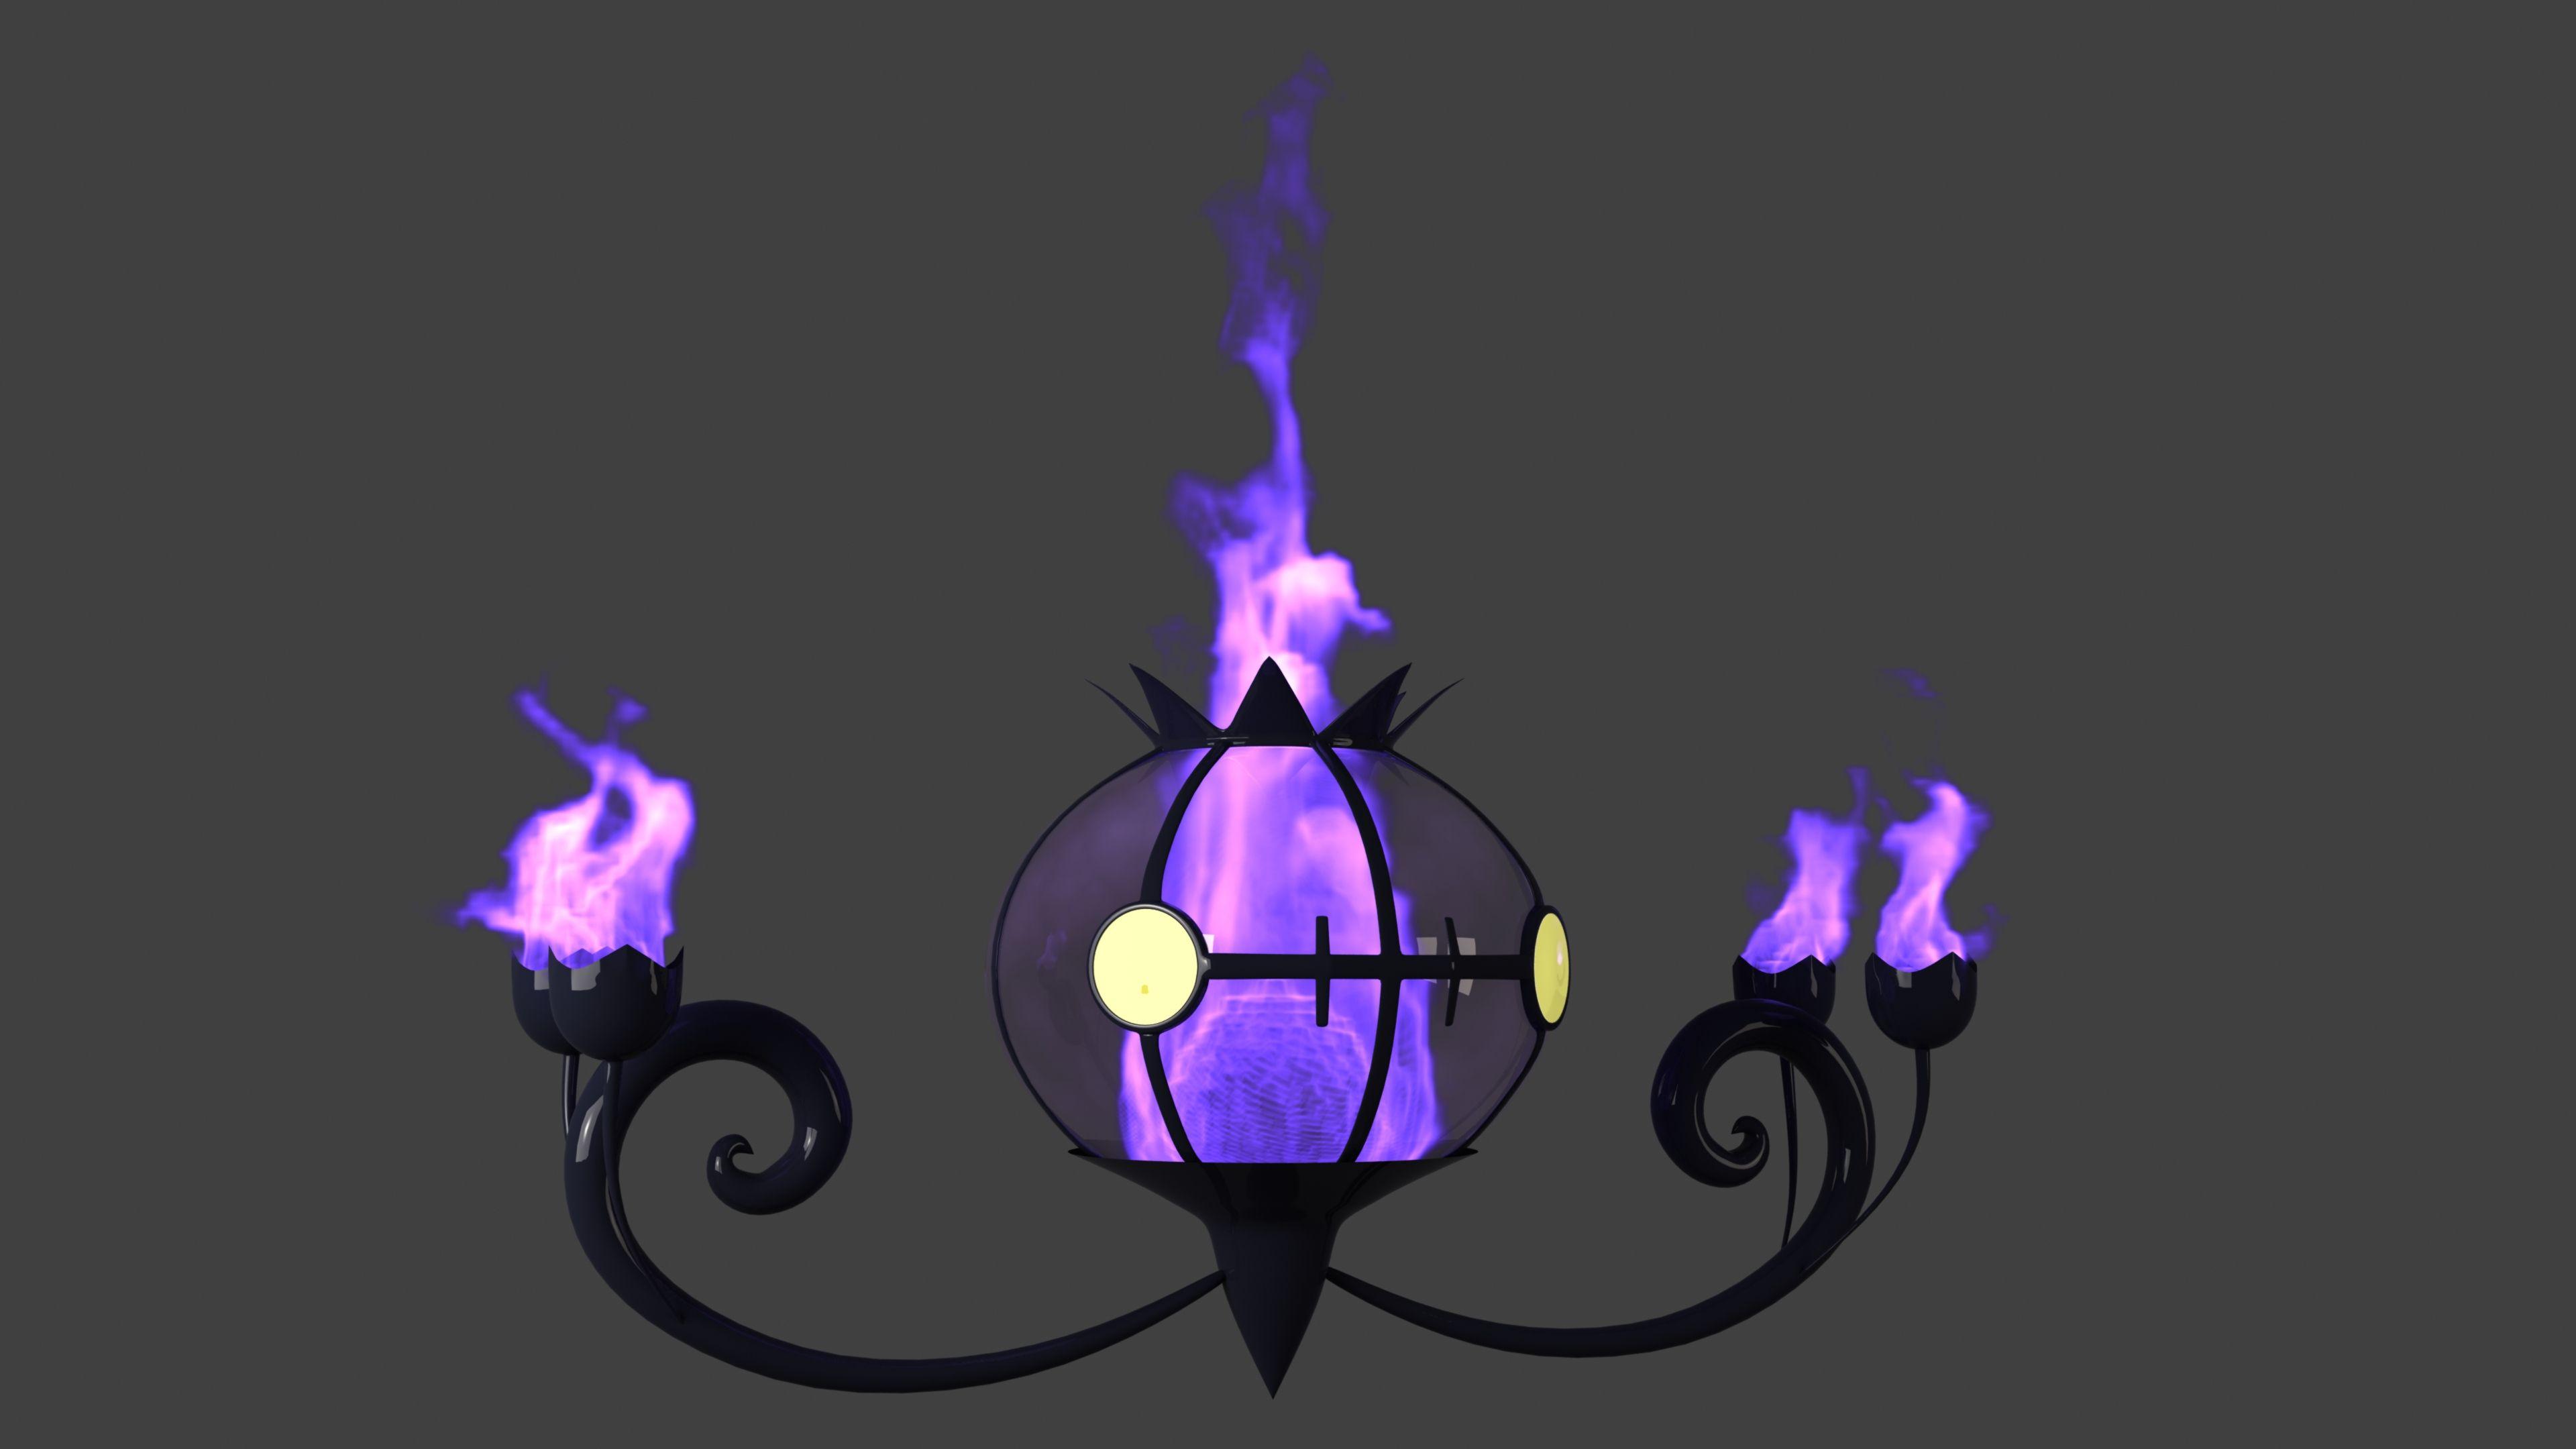 Chandelure Wallpaper Image Photo Picture Background